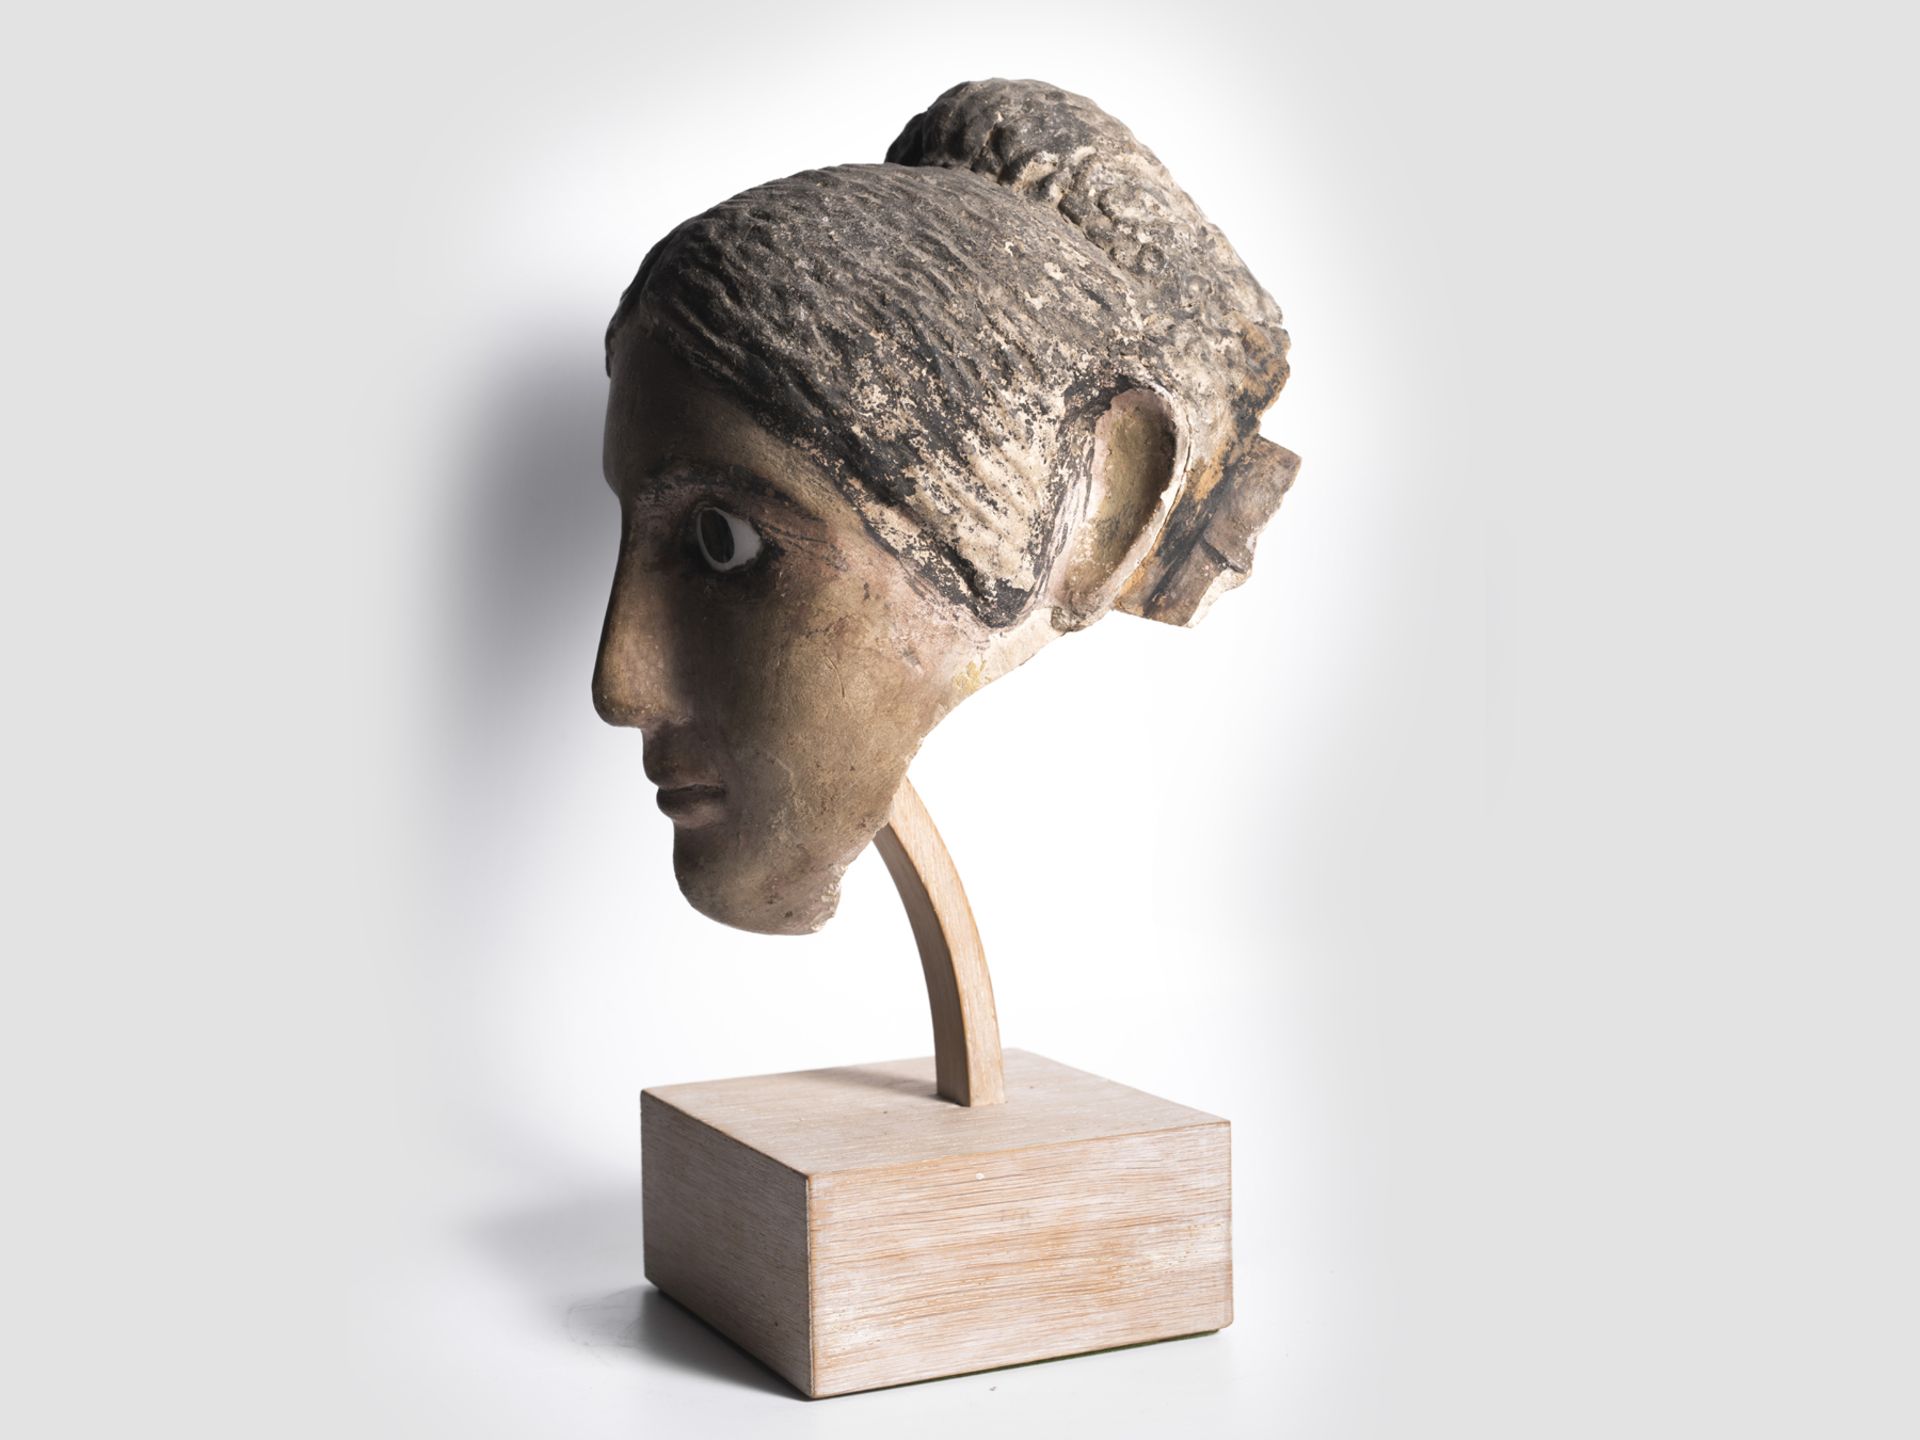 Expressive Mummy Mask of a Woman, Egypt, 2nd century AD - Image 4 of 8